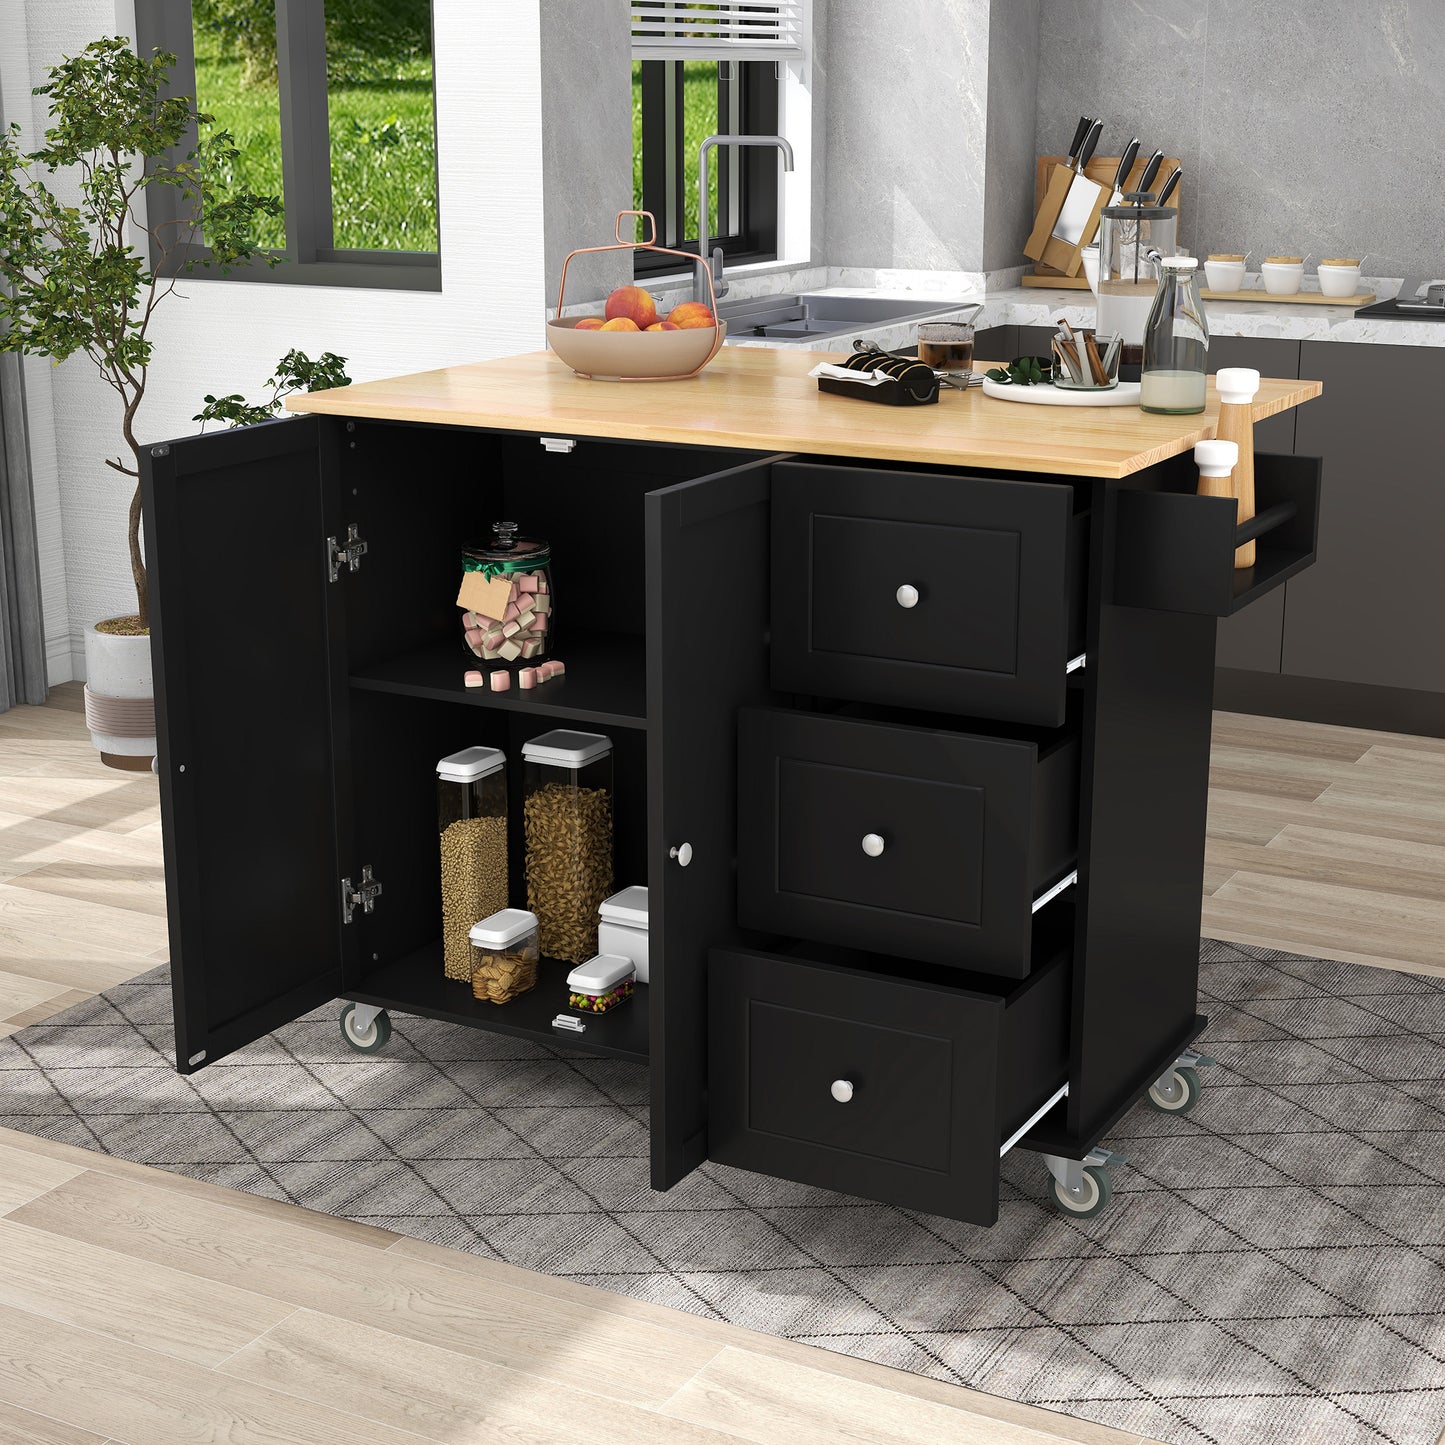 Rolling Mobile Kitchen Island with Solid Wood Top and Locking Wheels,52.7 Inch Width,Storage Cabinet and Drop Leaf Breakfast Bar,Spice Rack, Towel Rack & Drawer (Black)